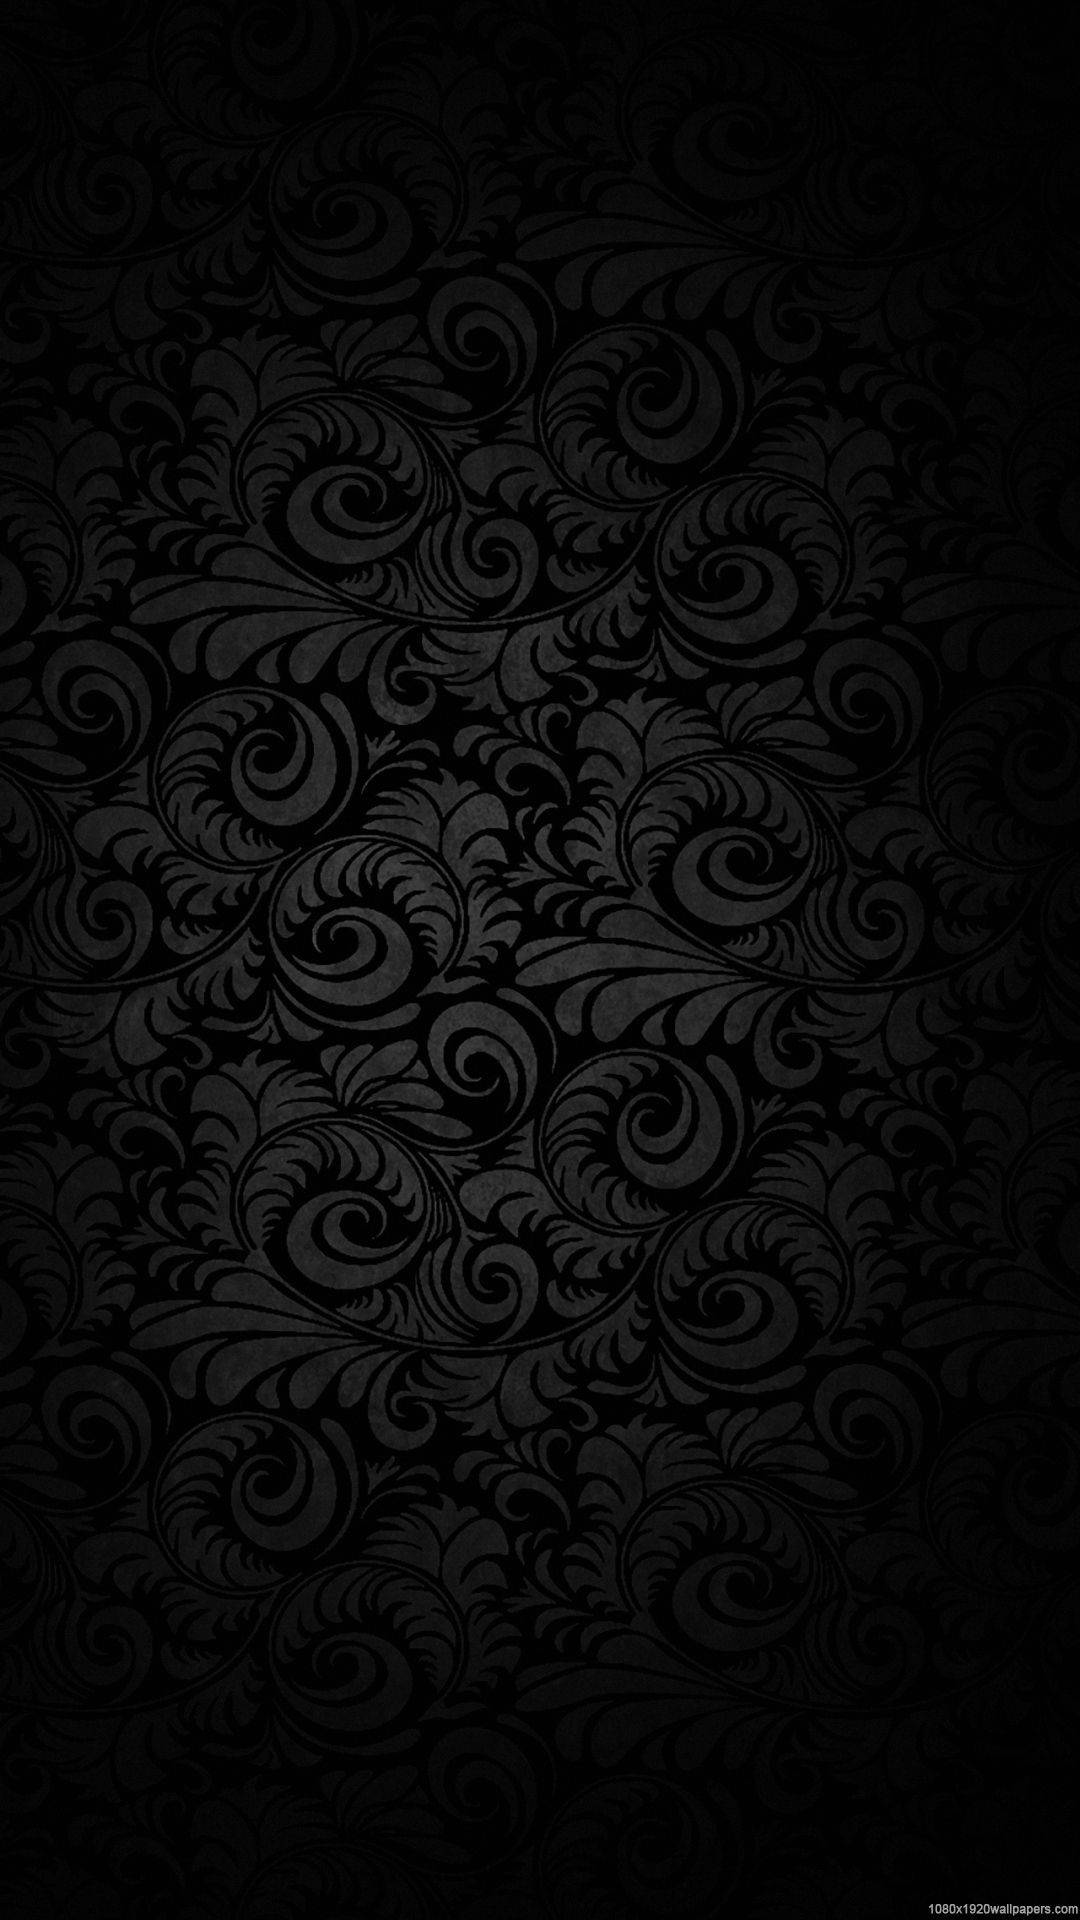 186 Mobile Wallpapers & Backgrounds For